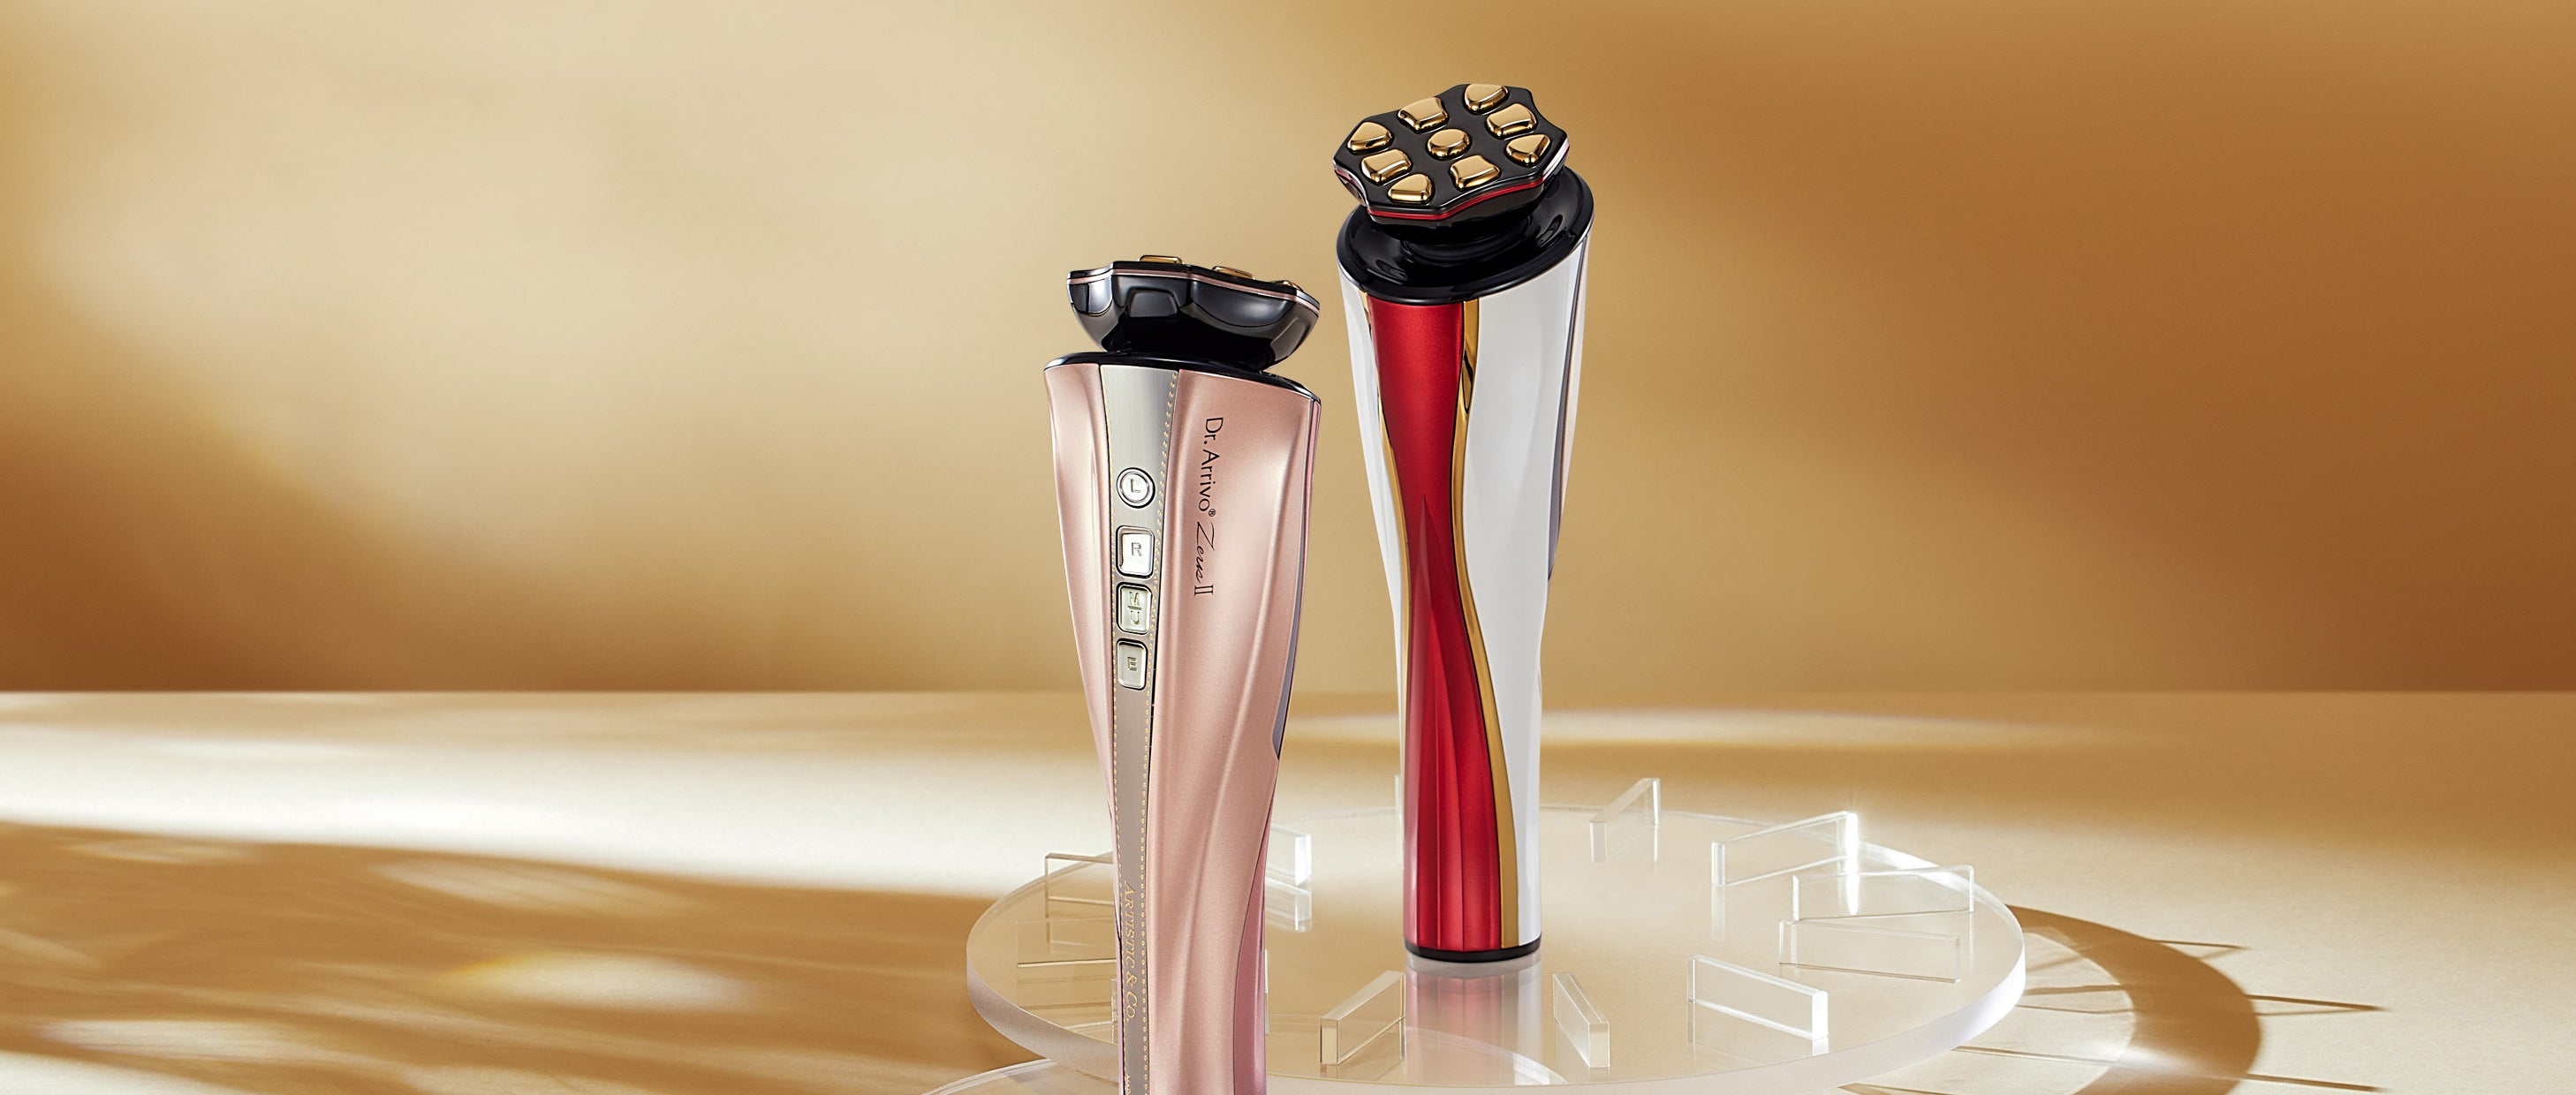 Artistic & Co Luxury Beauty Anti-Aging Devices